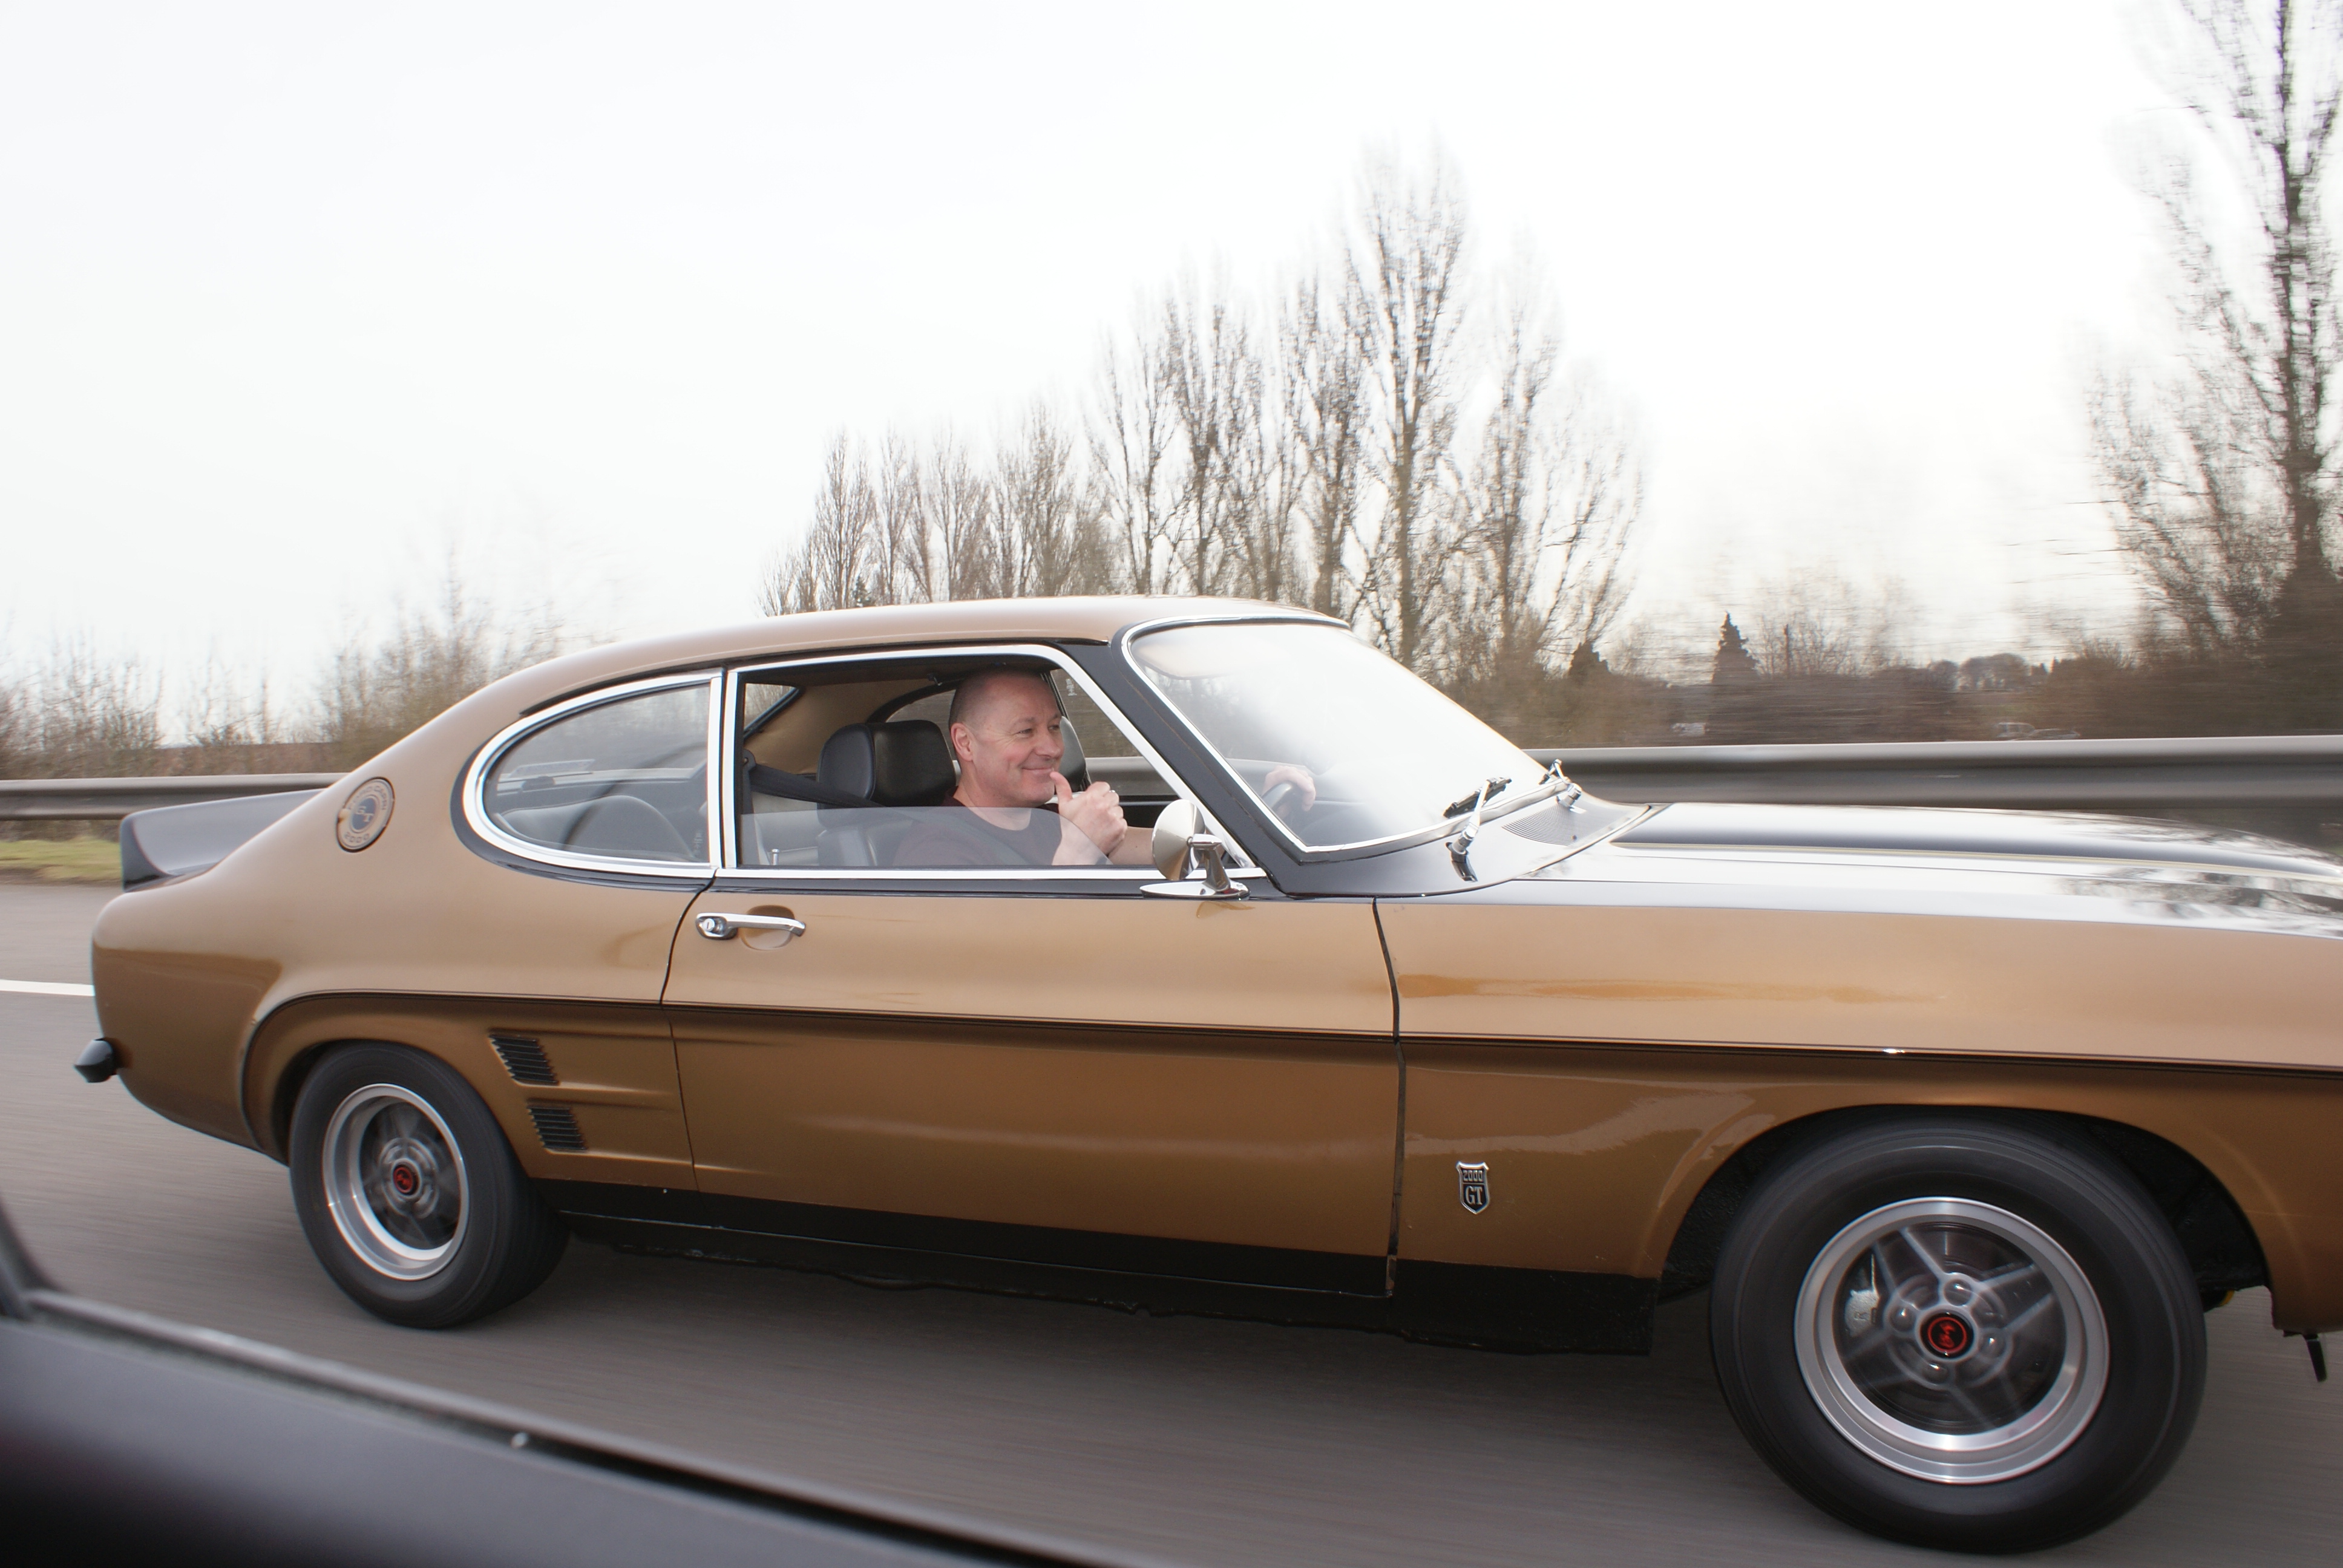 Gold and black custom mk1 ford capri, driving along the m6 motorway at speed on route to the NEC